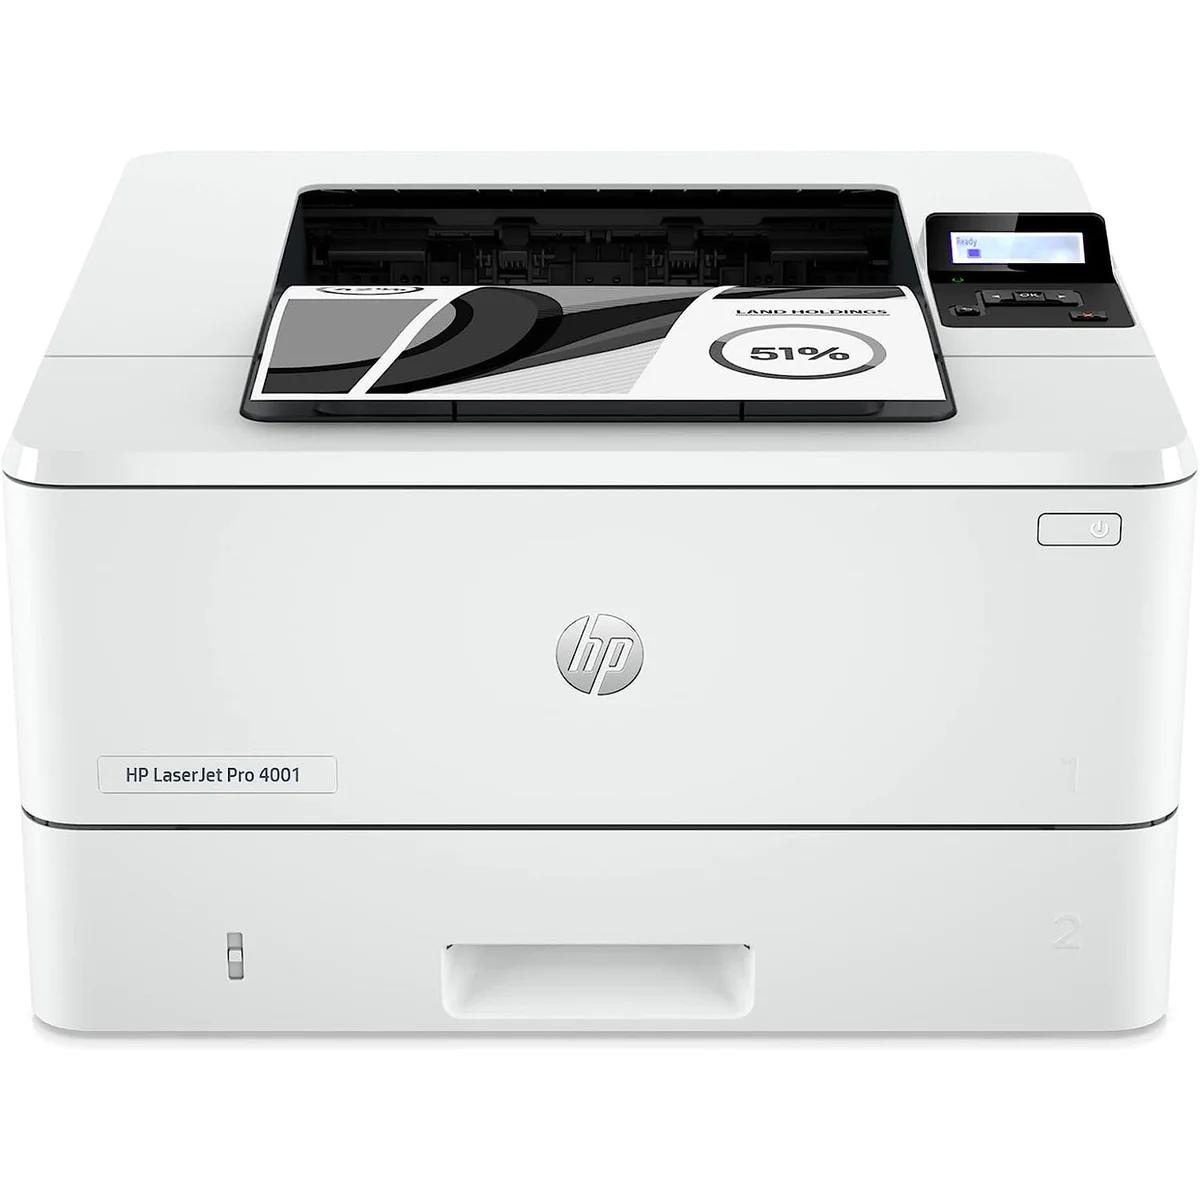 hewlett-packard certificate of volatility hp laserjet pro m402 - How do I fix the supply memory warning on my printer